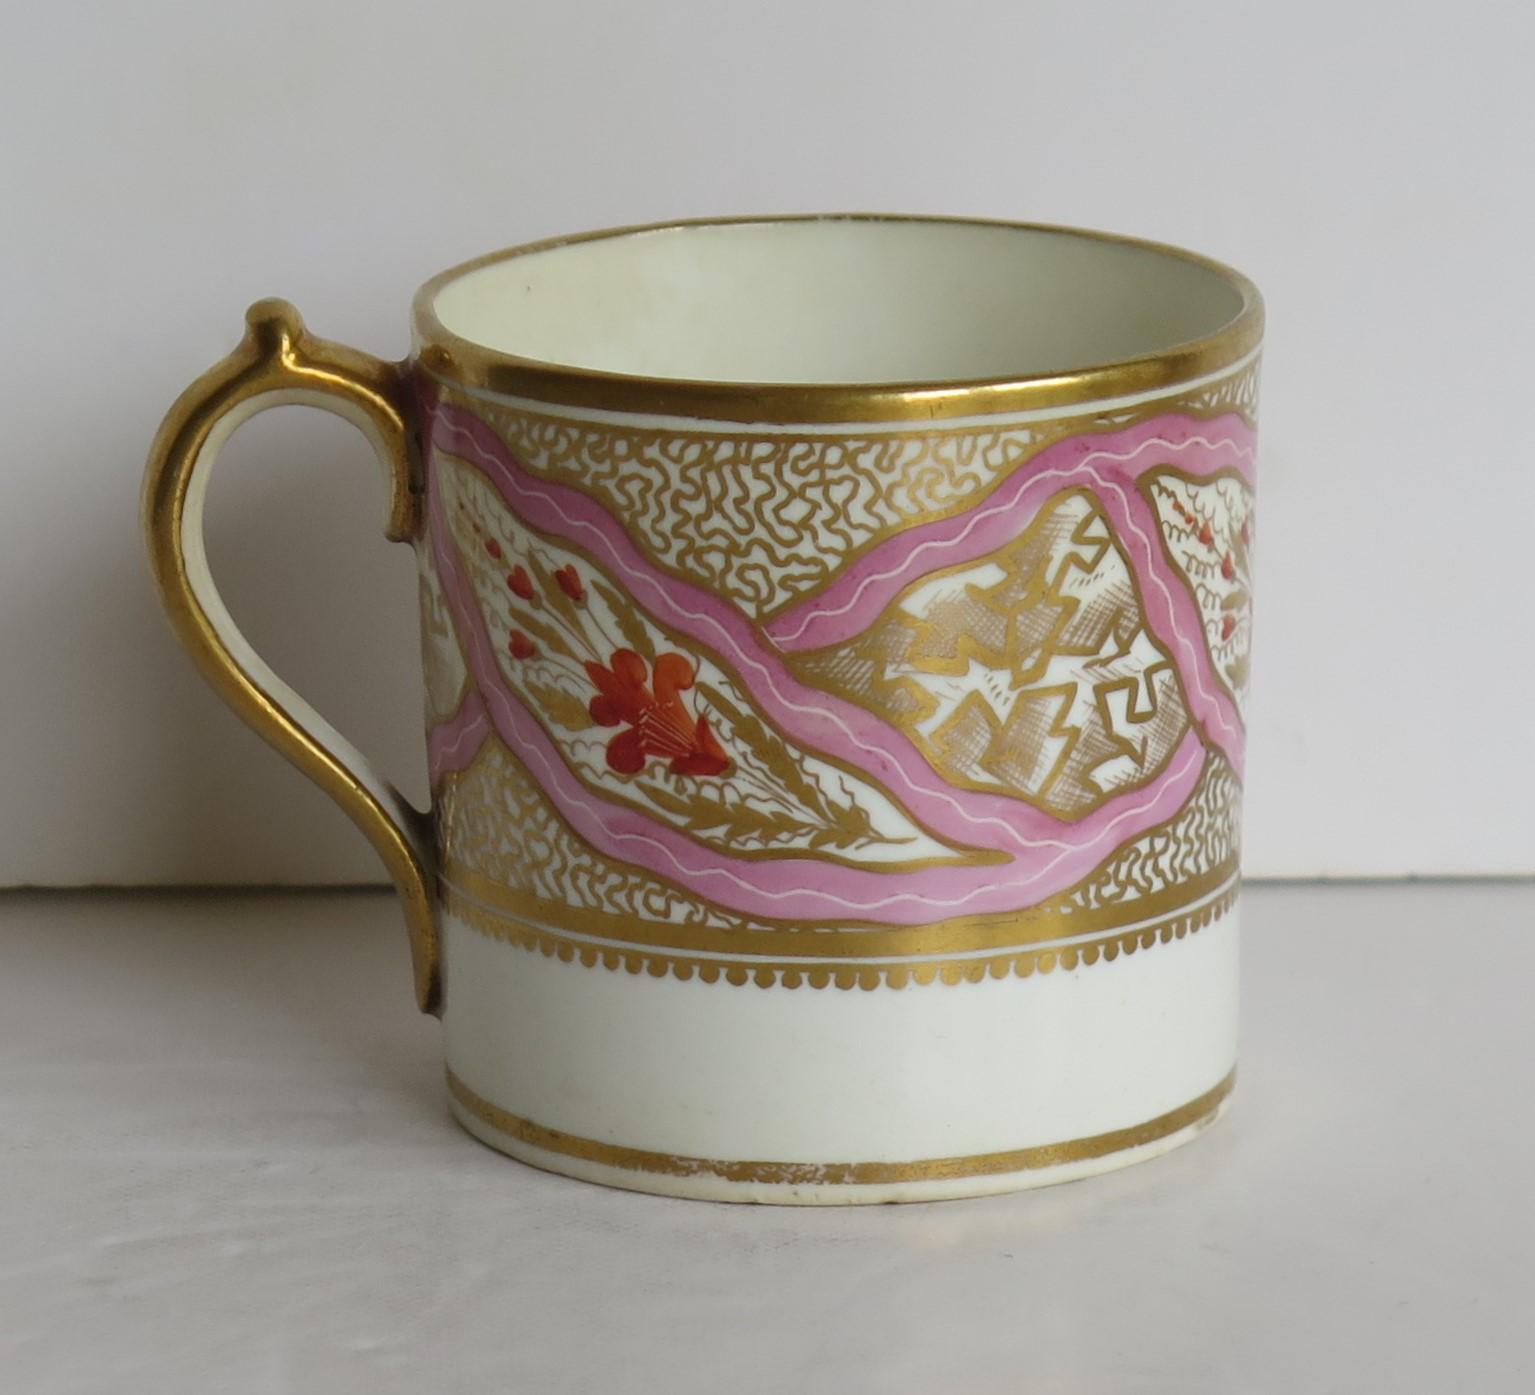 This is a fine porcelain coffee can made by Miles Mason, of Lane Delph, Stoke on Trent, England, circa 1805. It has a plain loop handle with the characteristic upper spur which is a known Miles Mason handle shape.

Miles Mason was the founder of